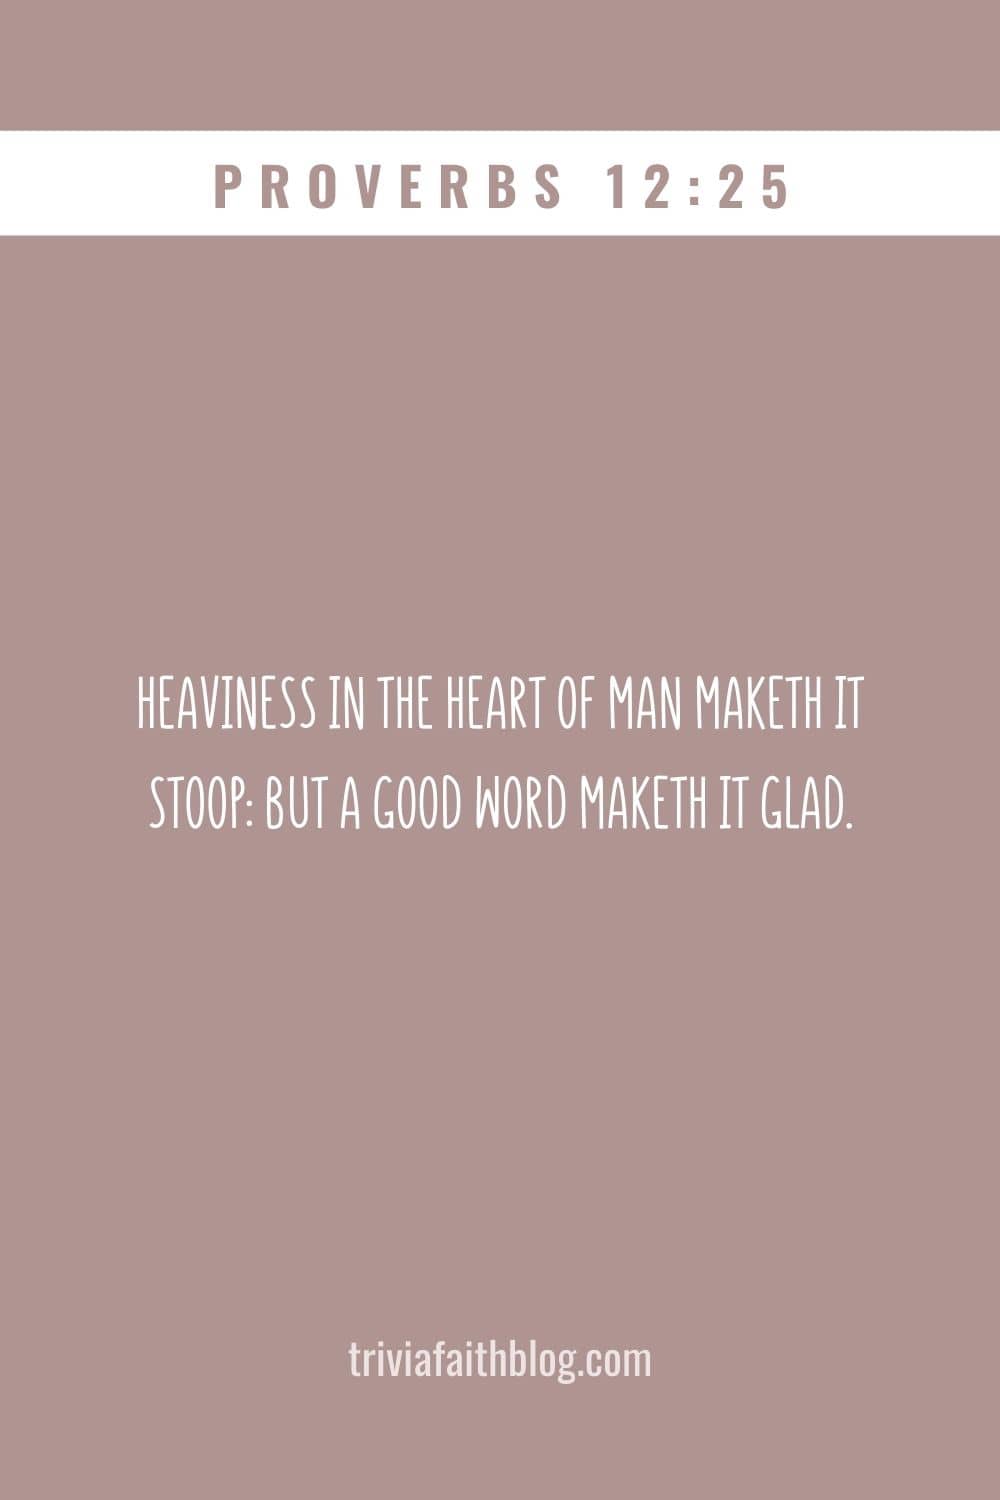 Heaviness in the heart of man maketh it stoop but a good word maketh it glad